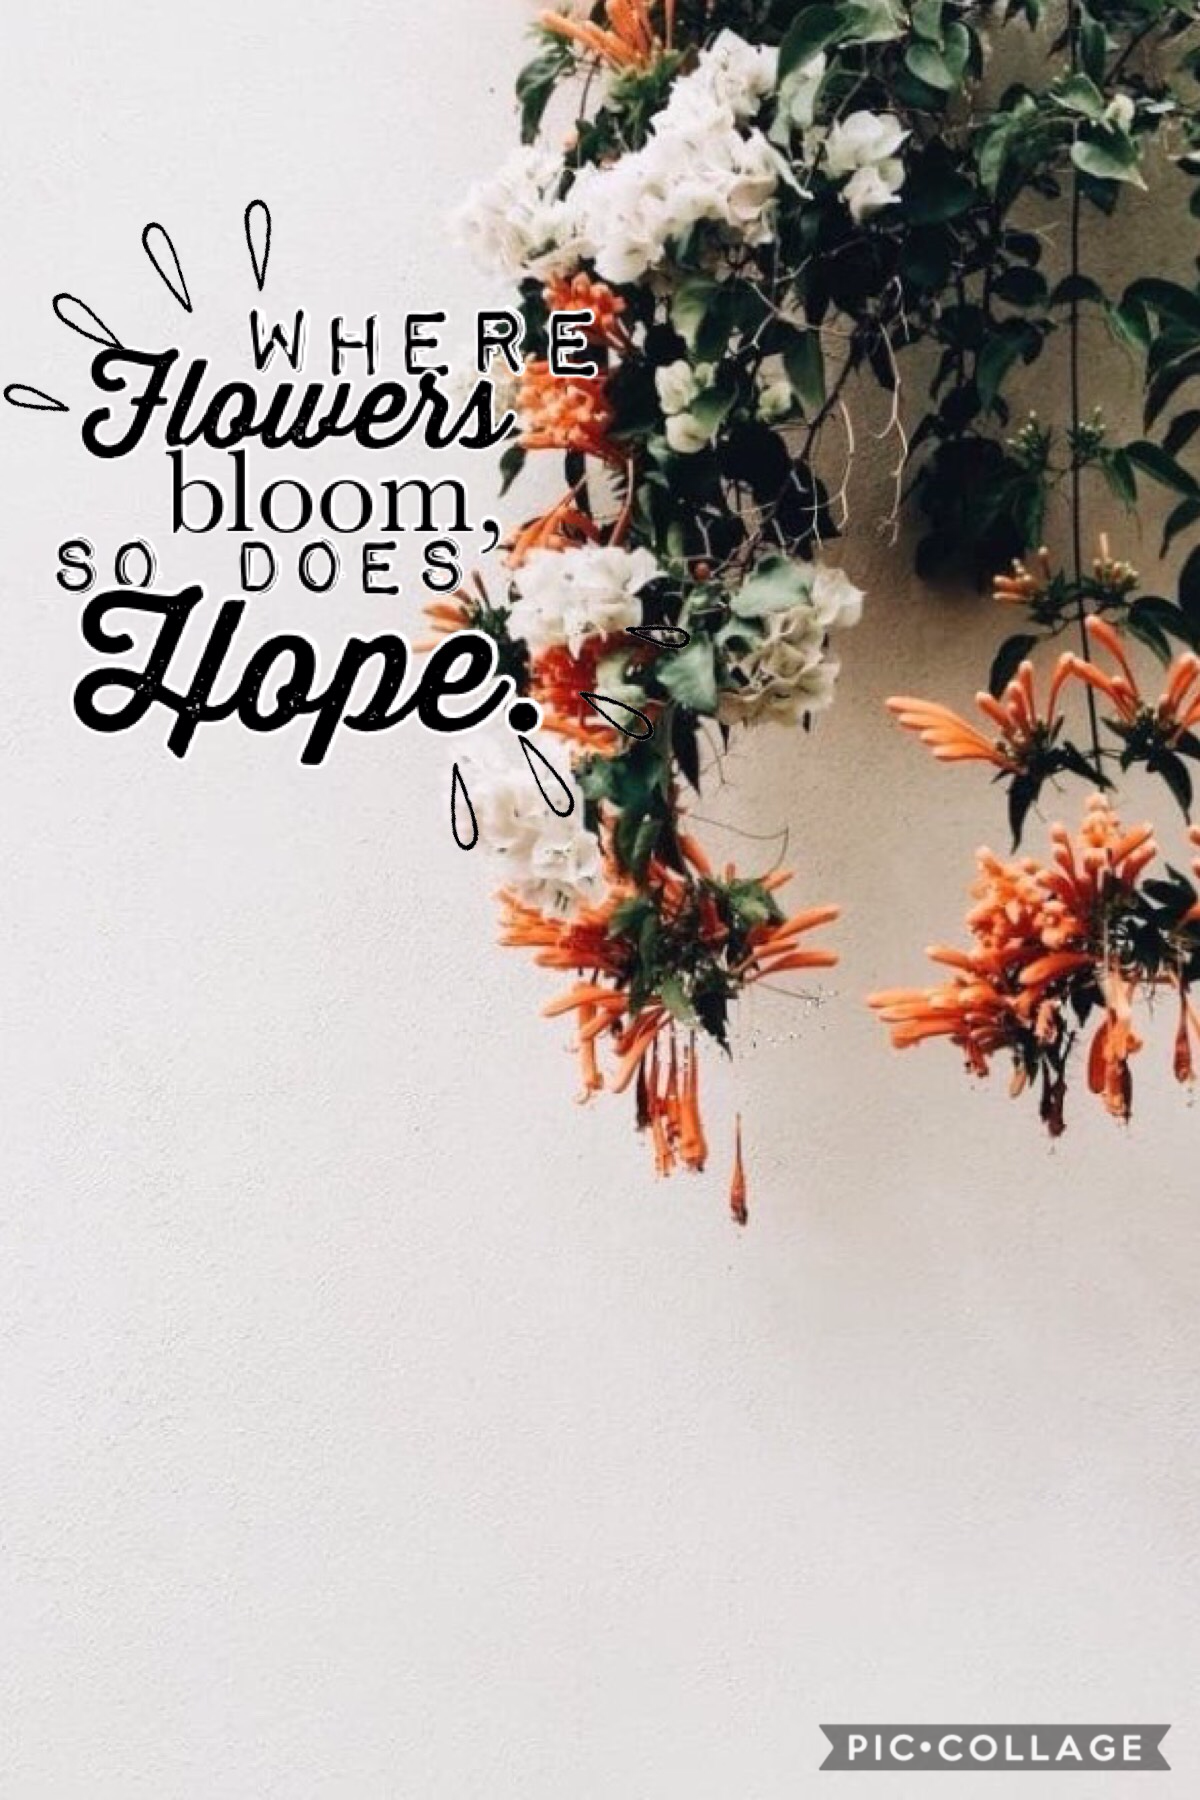 🌸where flowers bloom, so does hope🌸